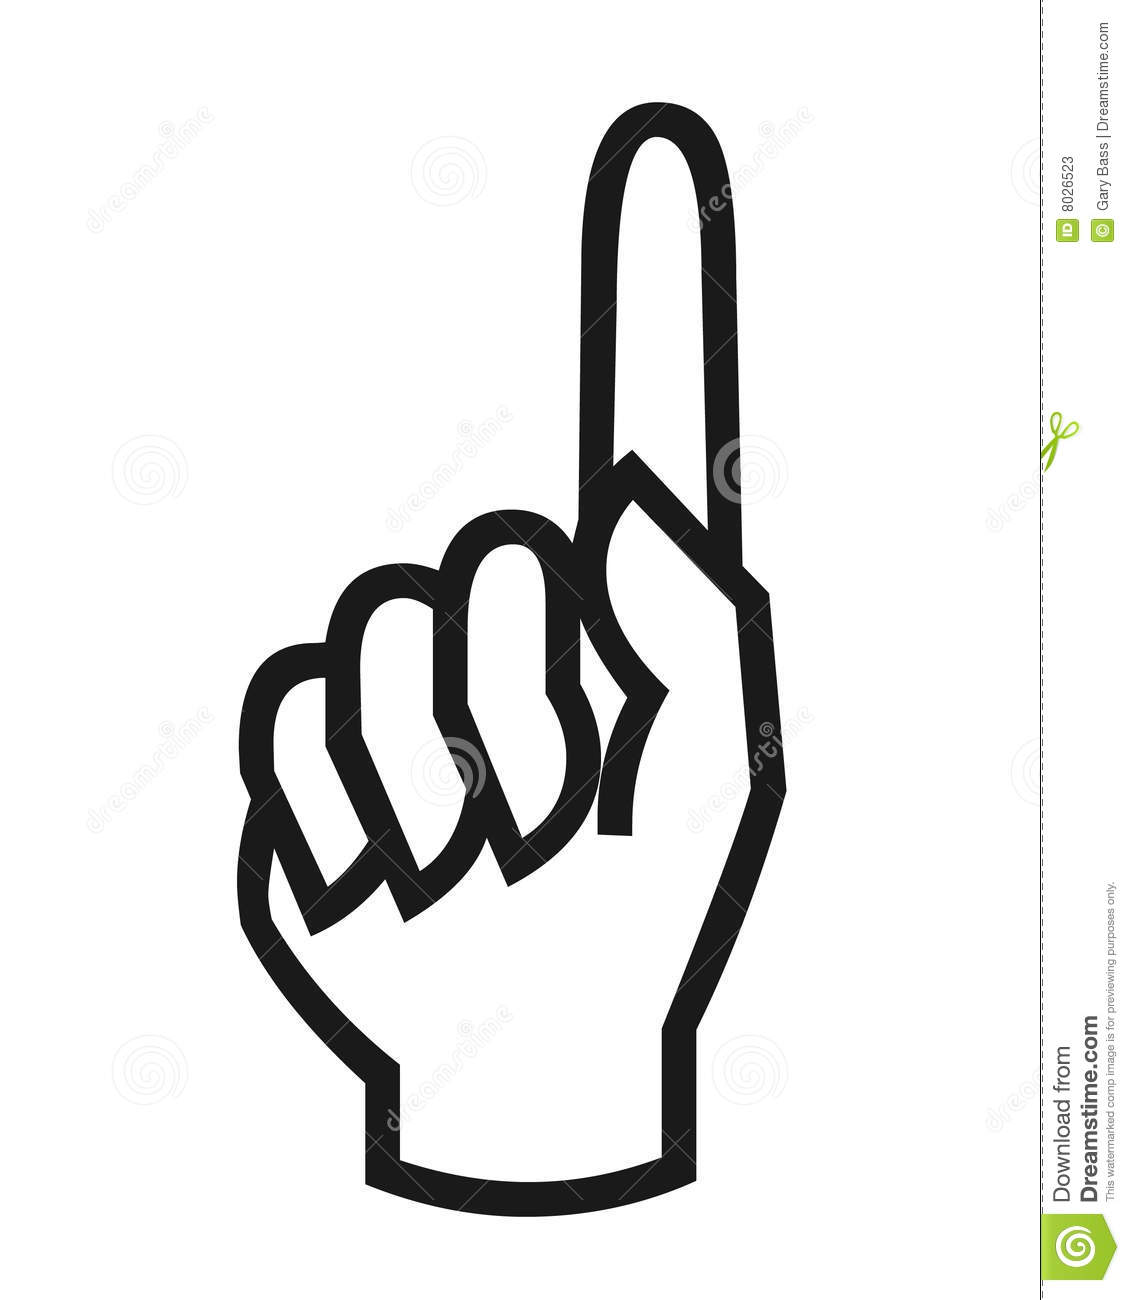 Closeup Of Finger Pointing Up Symbol On White Background 